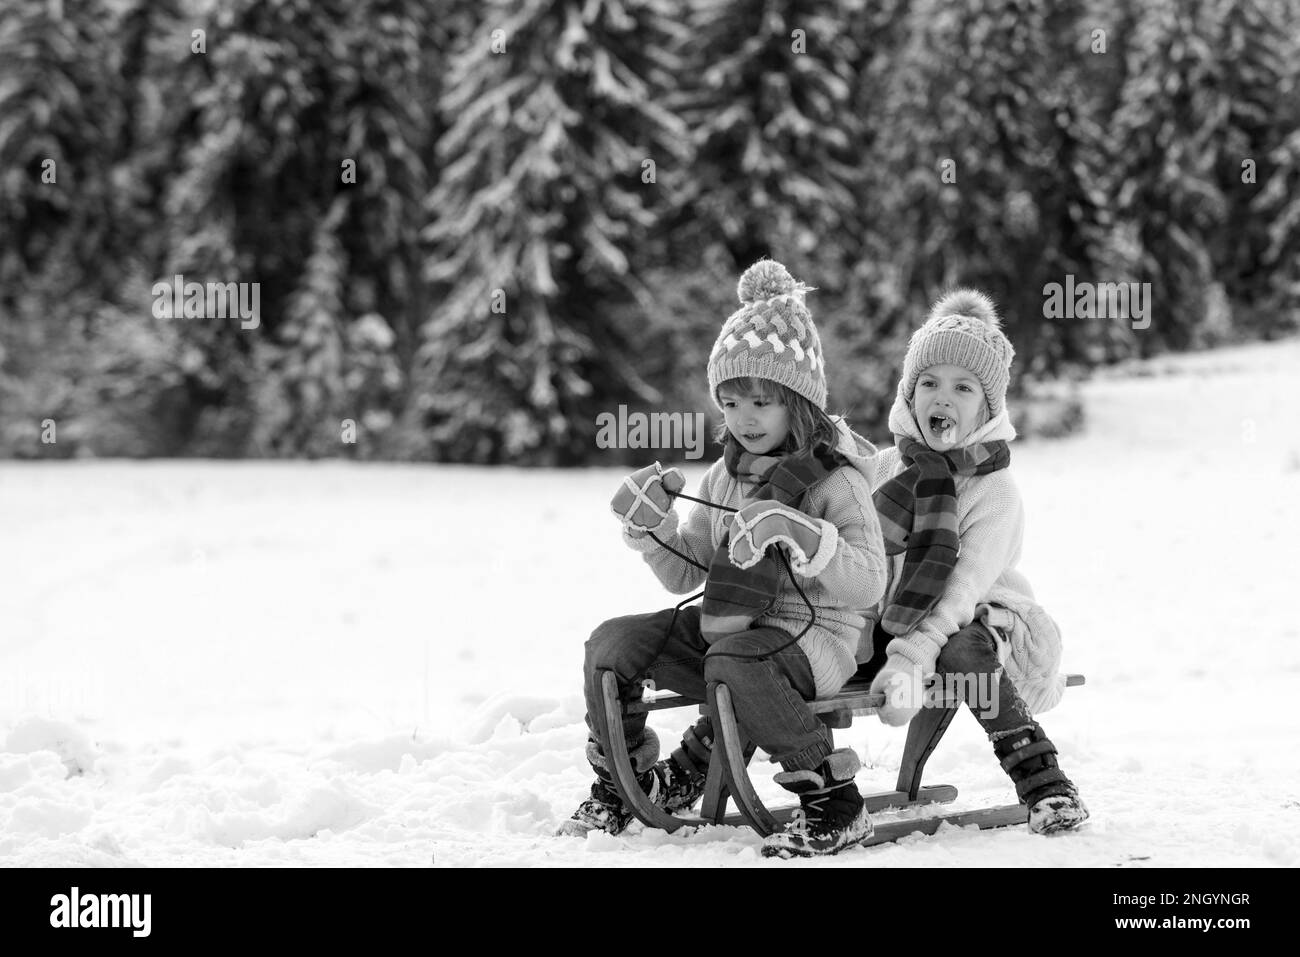 Kids ride on a wooden retro sled on a winter day. Active winter outdoors games. Happy Christmas vacation. Stock Photo